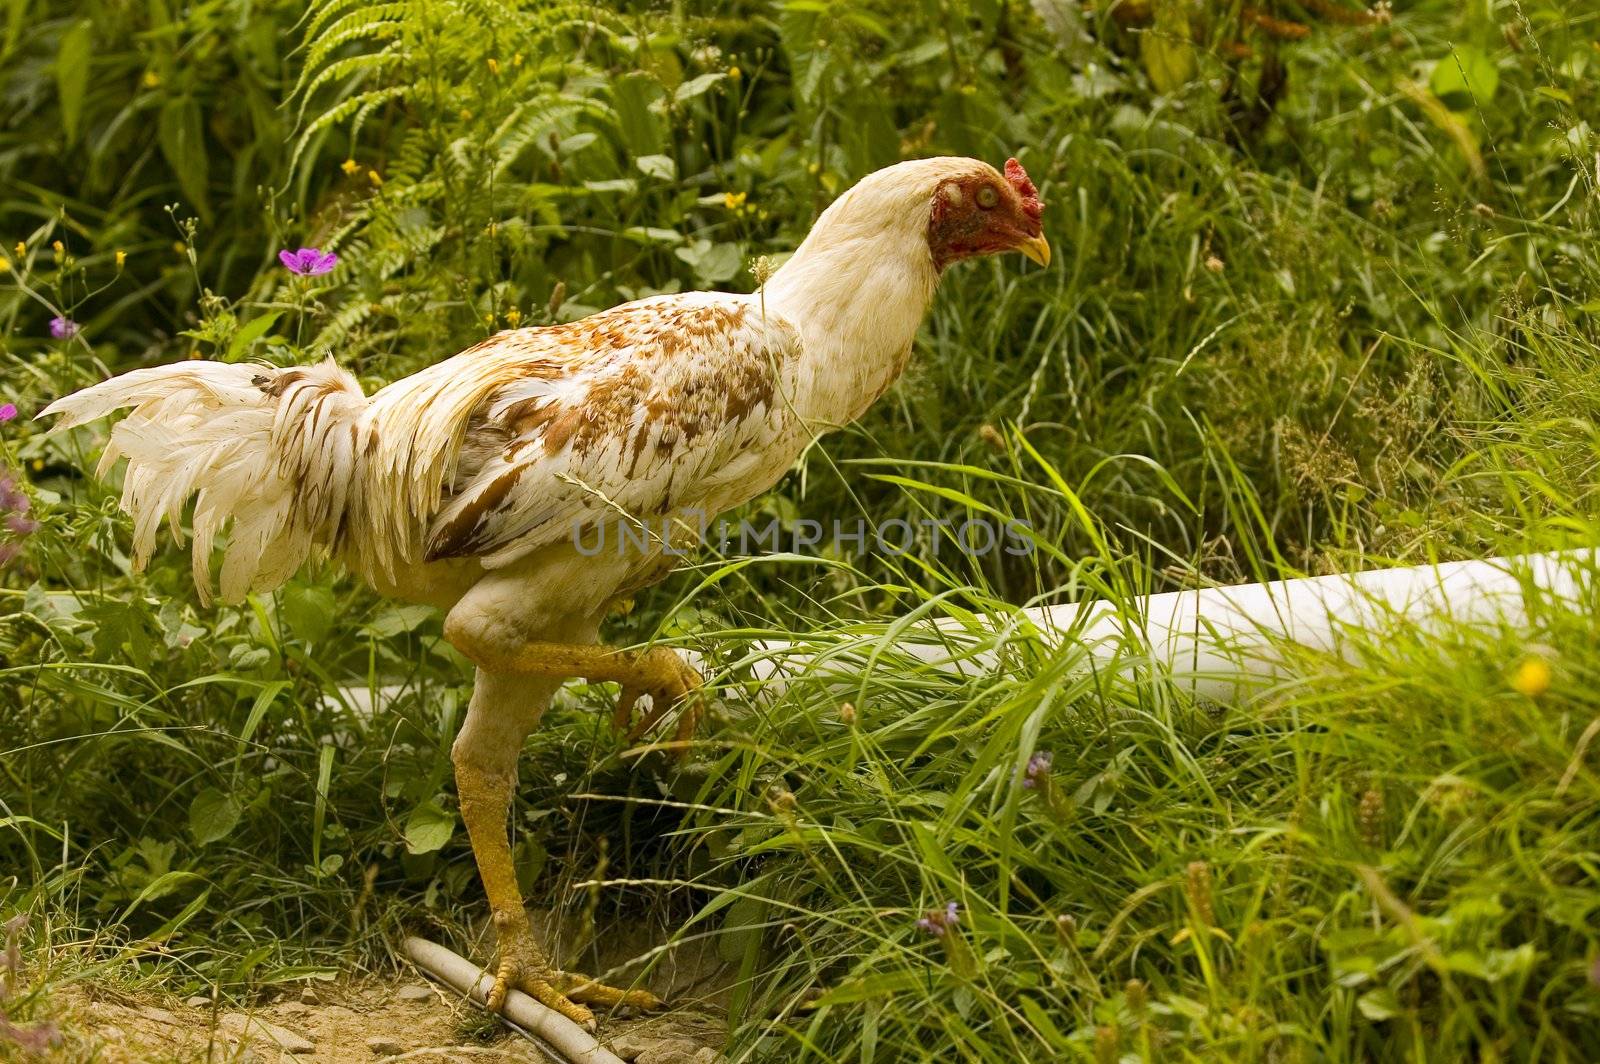 close up on chiken runing in the garden
